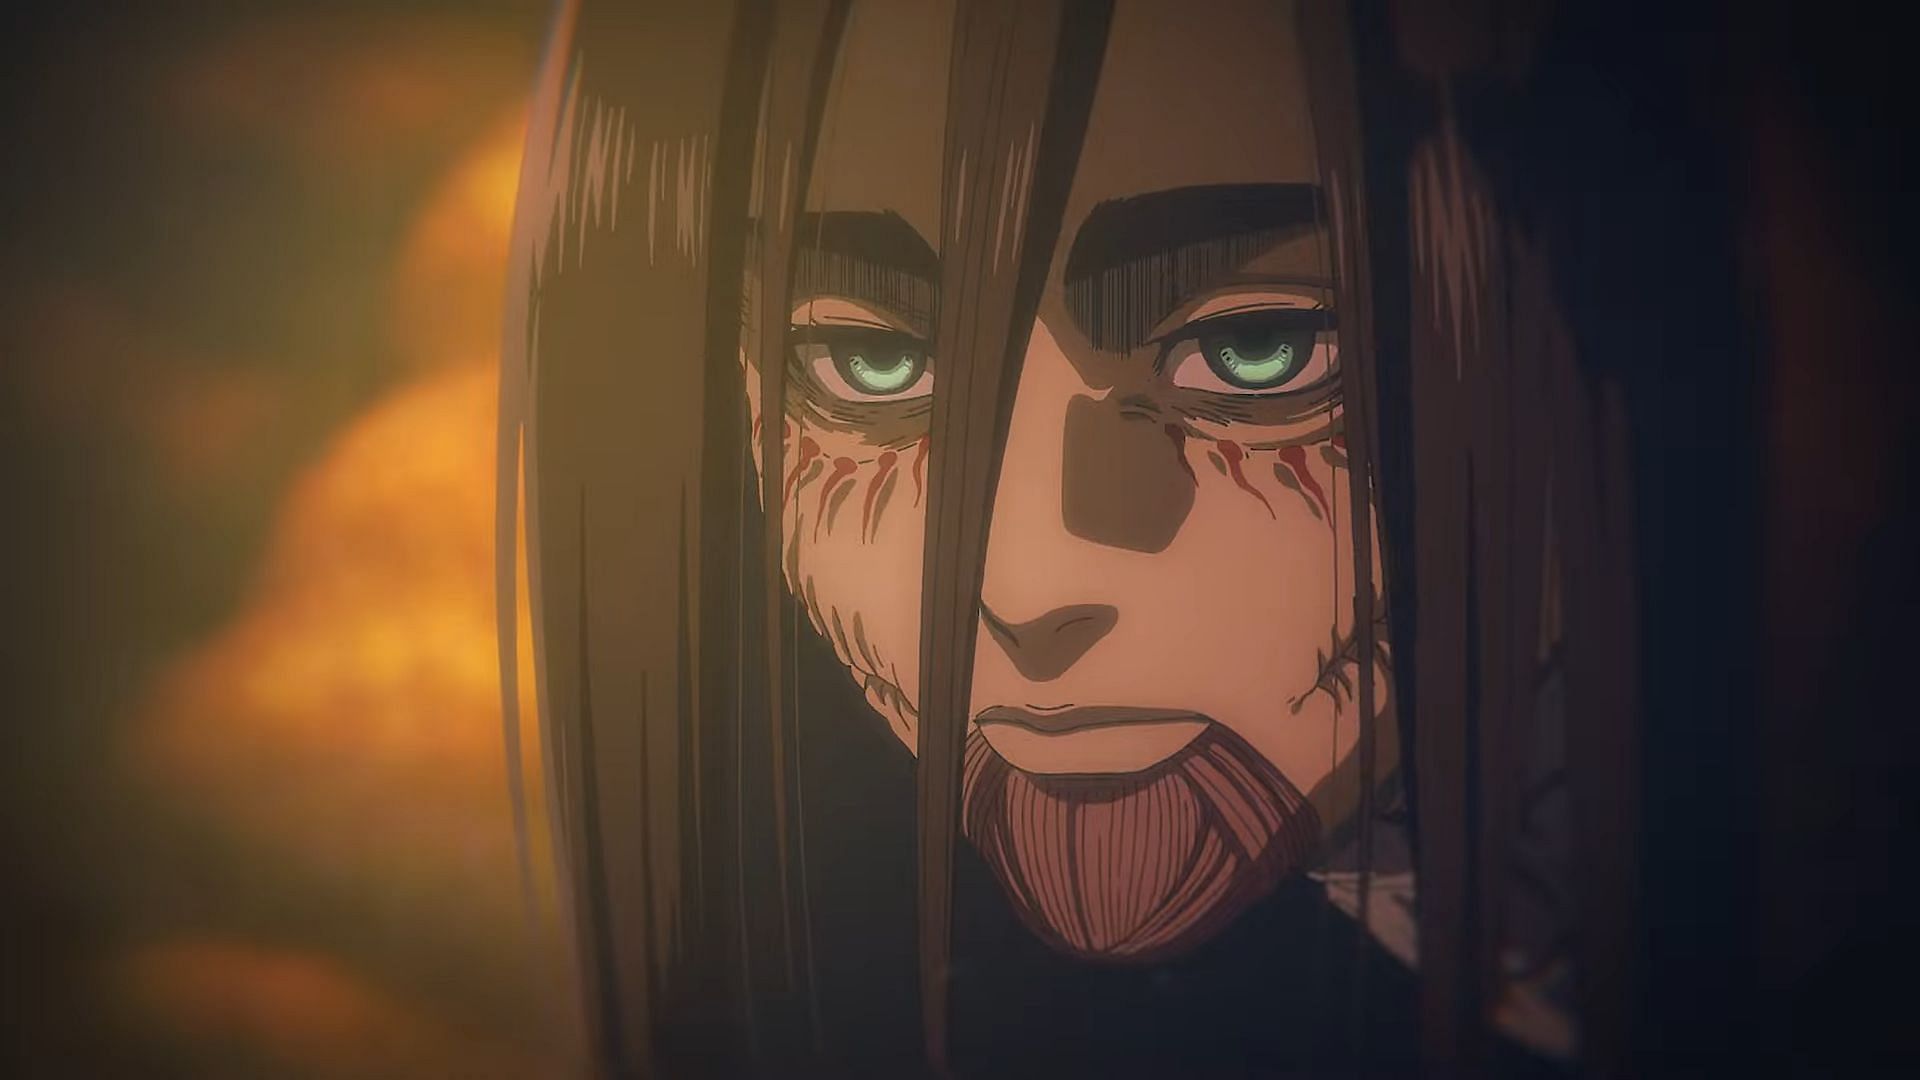 Attack On Titan Final episode trailer out. Scheduled next week for 1 hr 25  min long episode. Watch next. Follow @aniweebscom for latest…